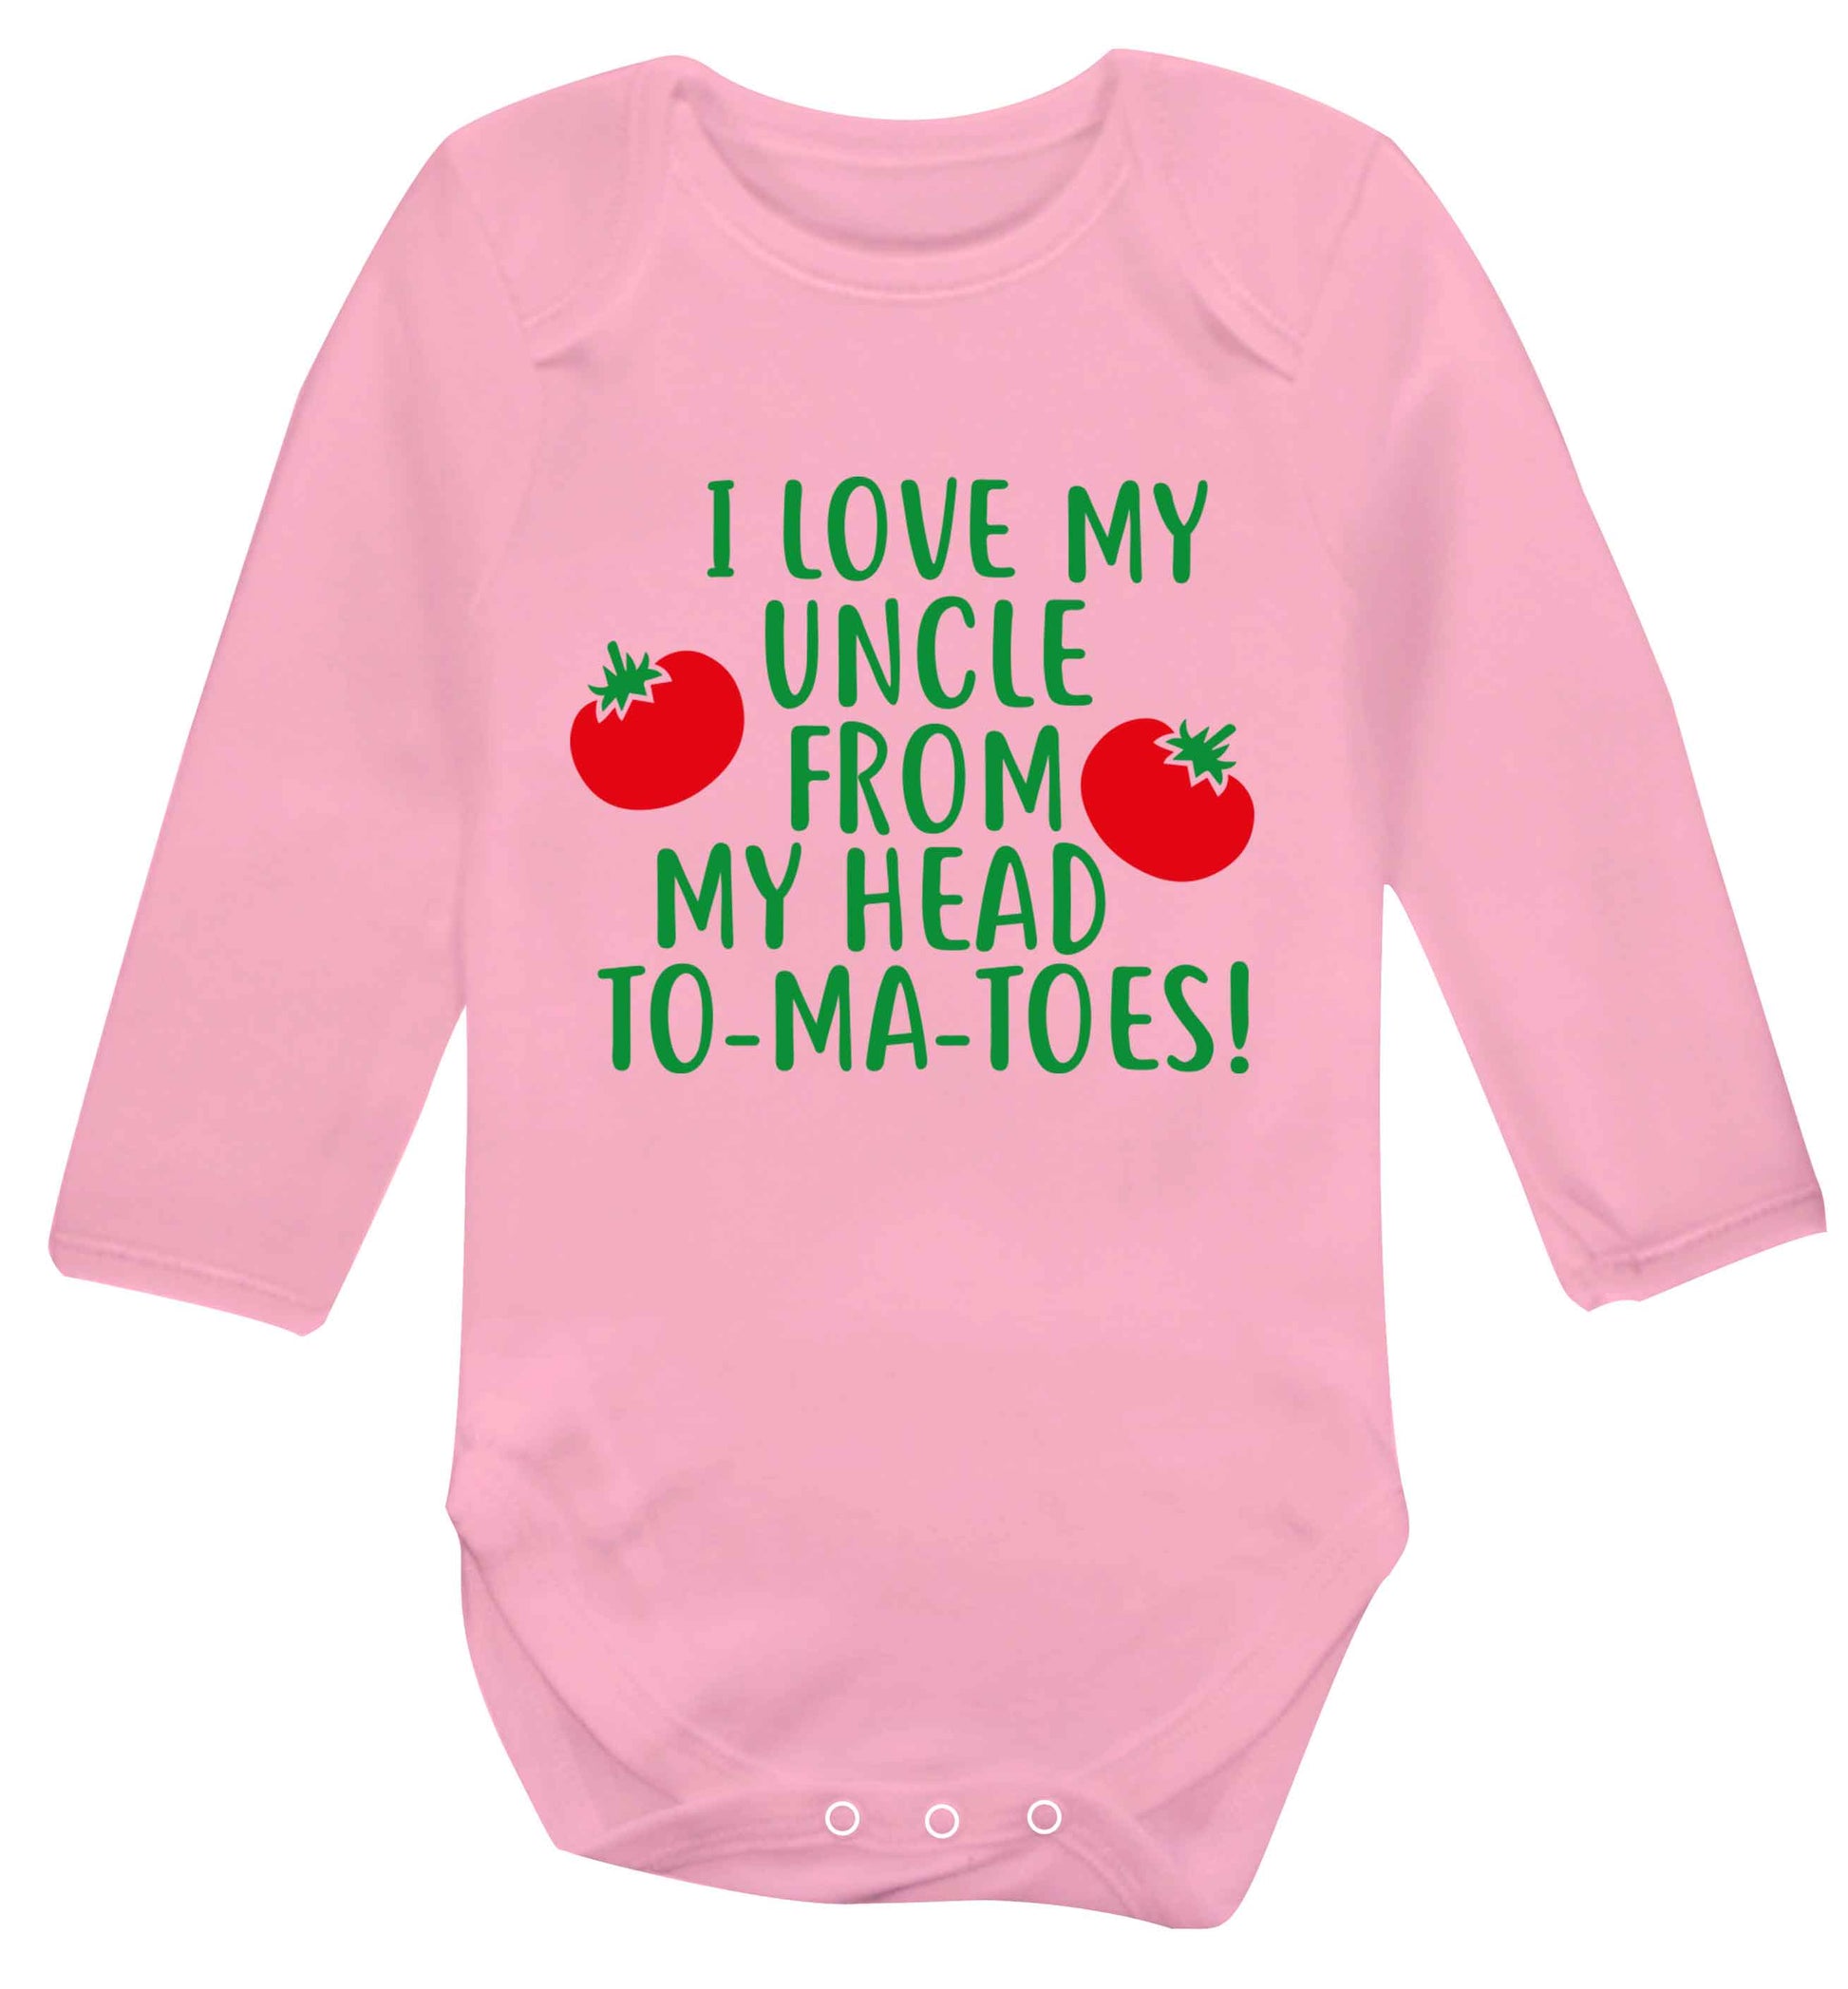 I love my uncle from my head To-Ma-Toes Baby Vest long sleeved pale pink 6-12 months